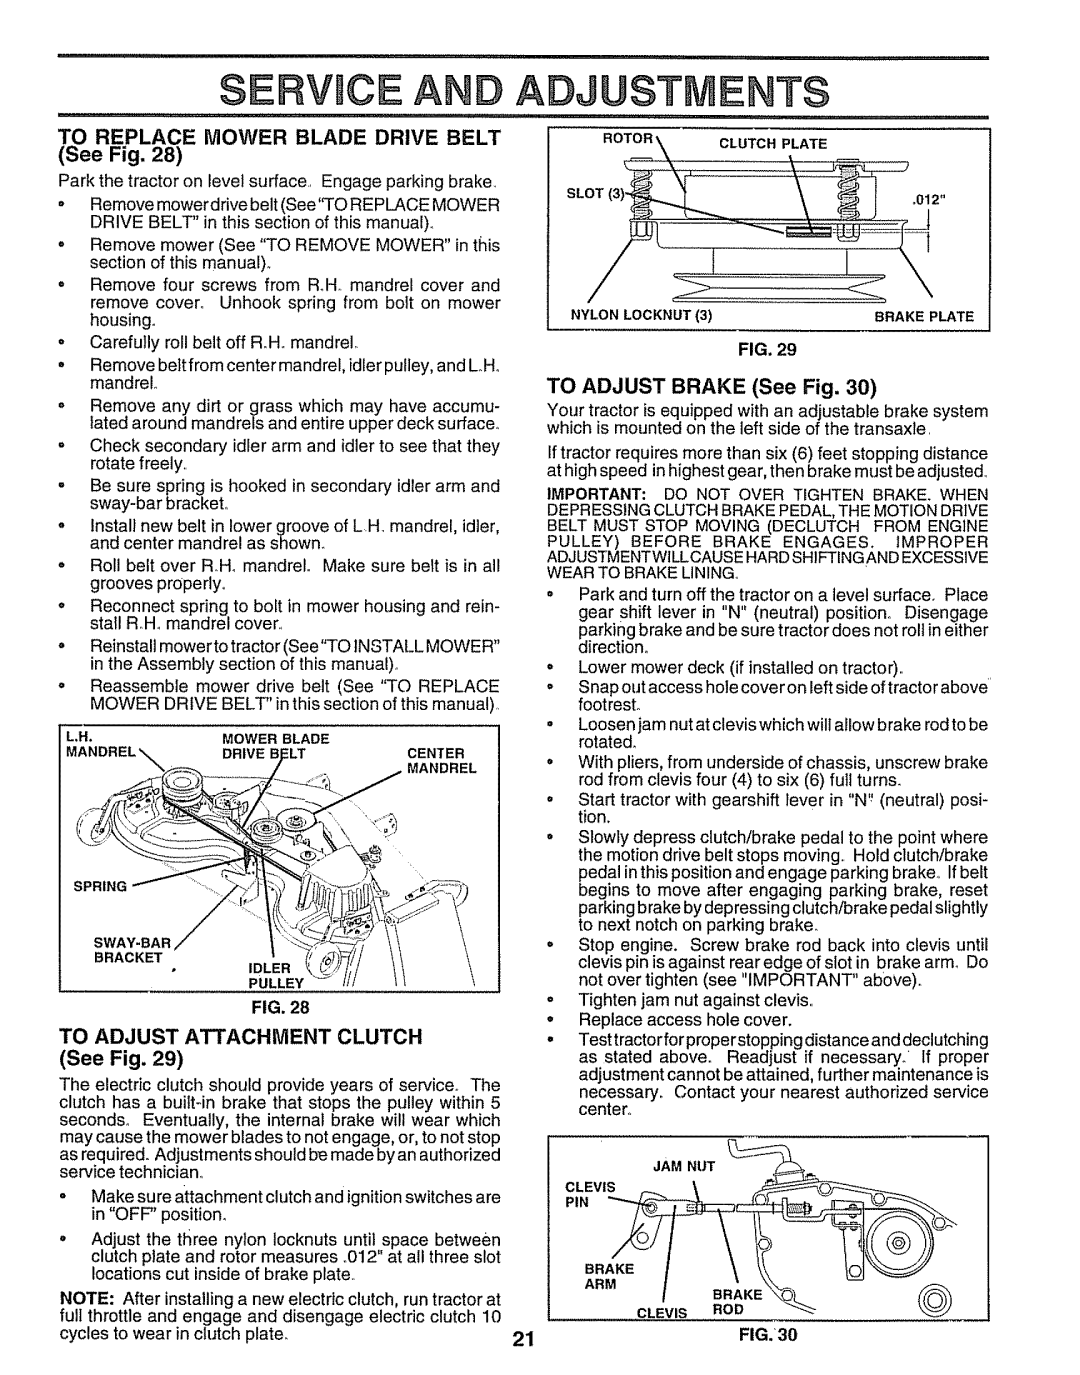 Sears 917.25597 Ce And Adjustments, To Replace Mower Blade Drive Belt, TO ADJUST BRAKE See Fig, To Adjust, Attachment 